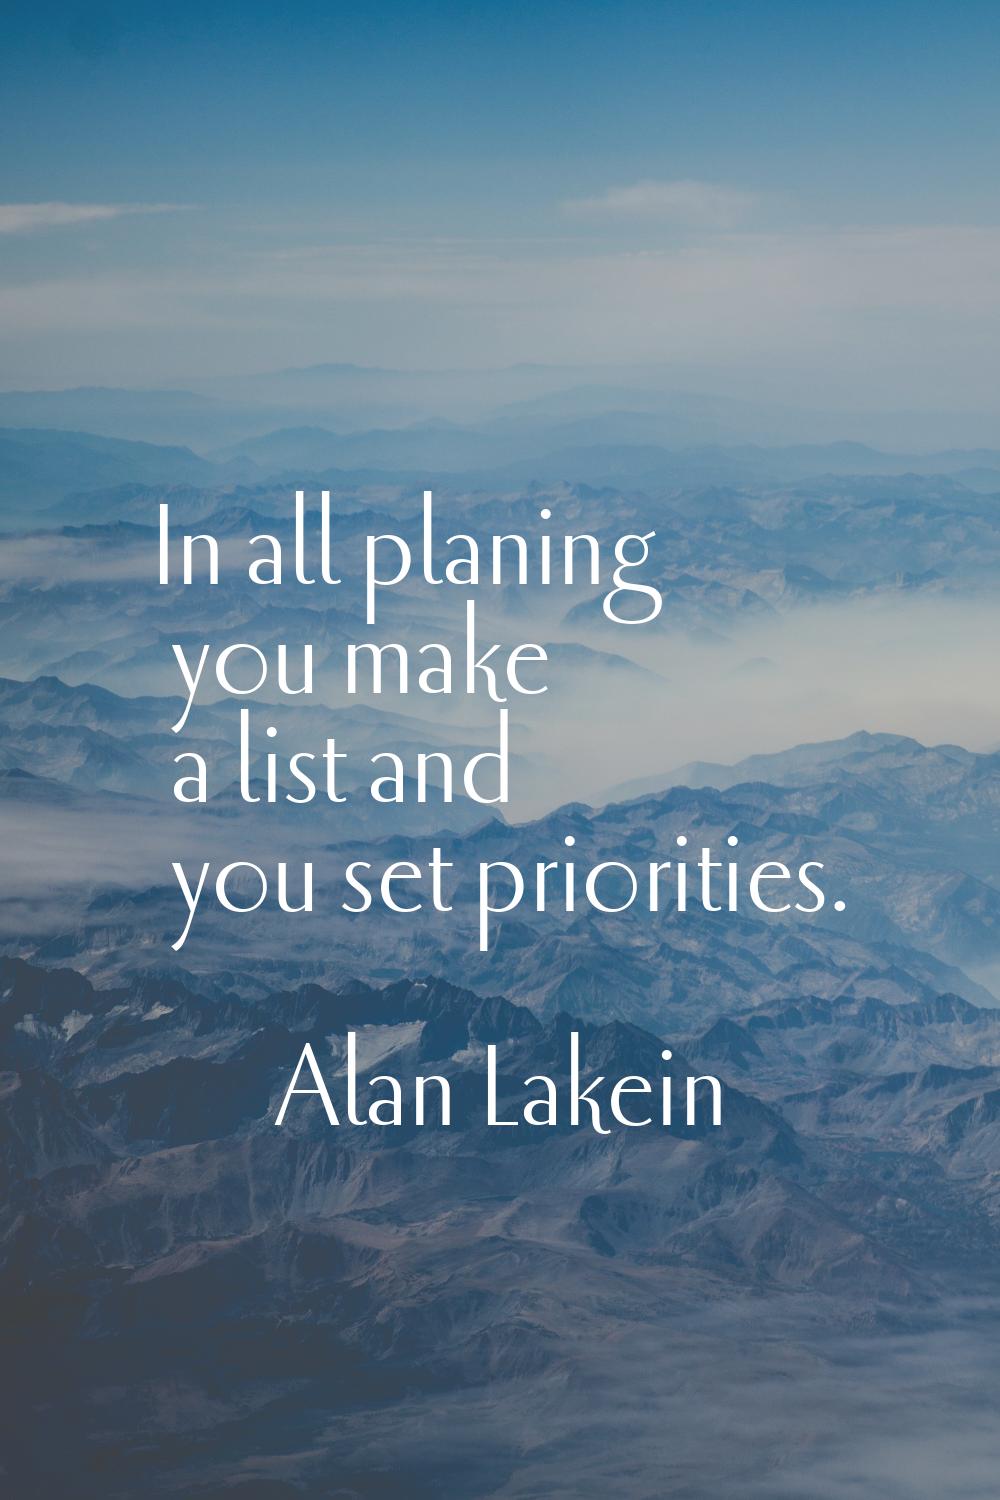 In all planing you make a list and you set priorities.